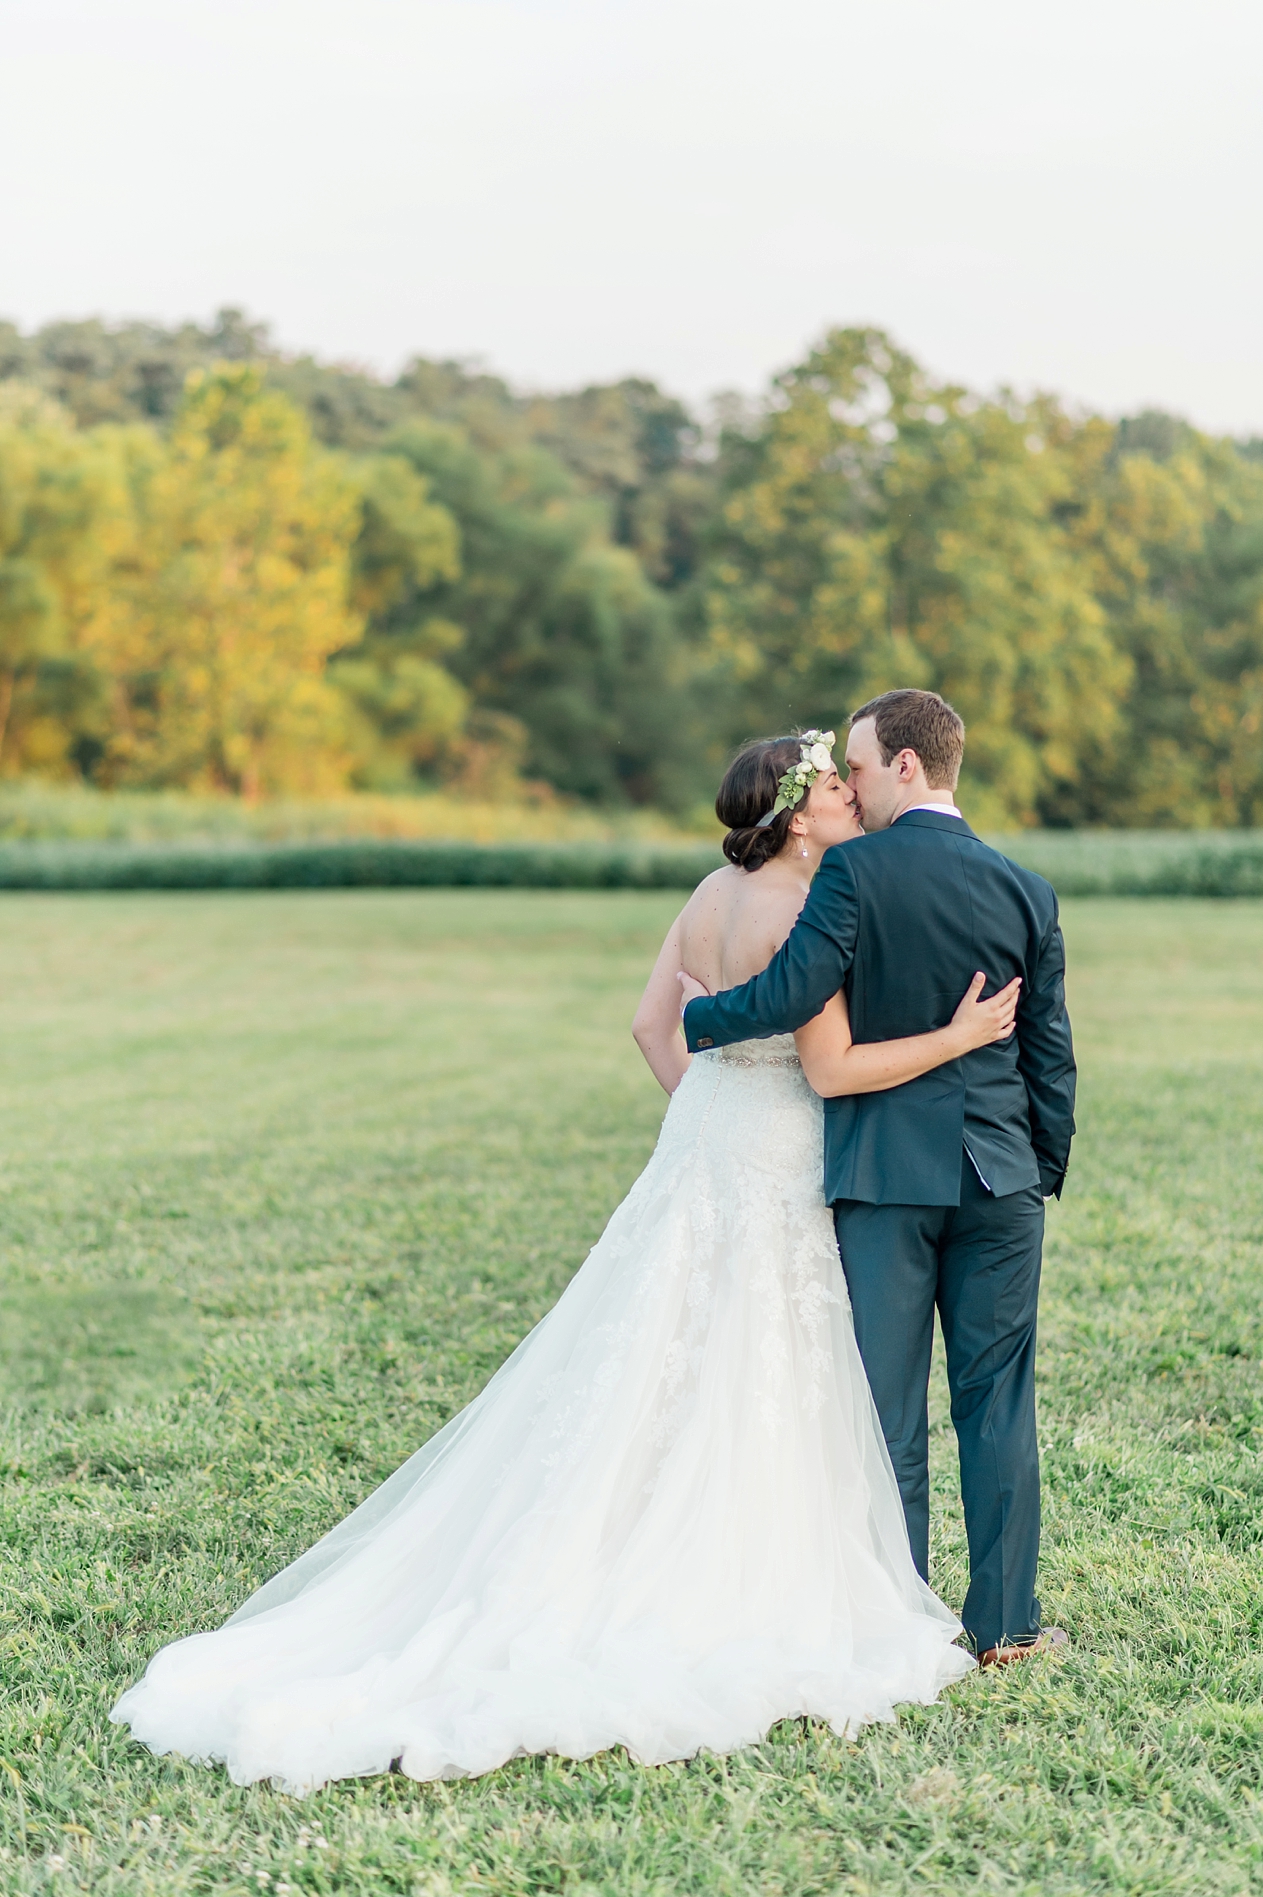 A Romantic and Relaxed, Old Westminster Winery Wedding byDC + Maryland Fine Art Photographer, Lauren R Swann